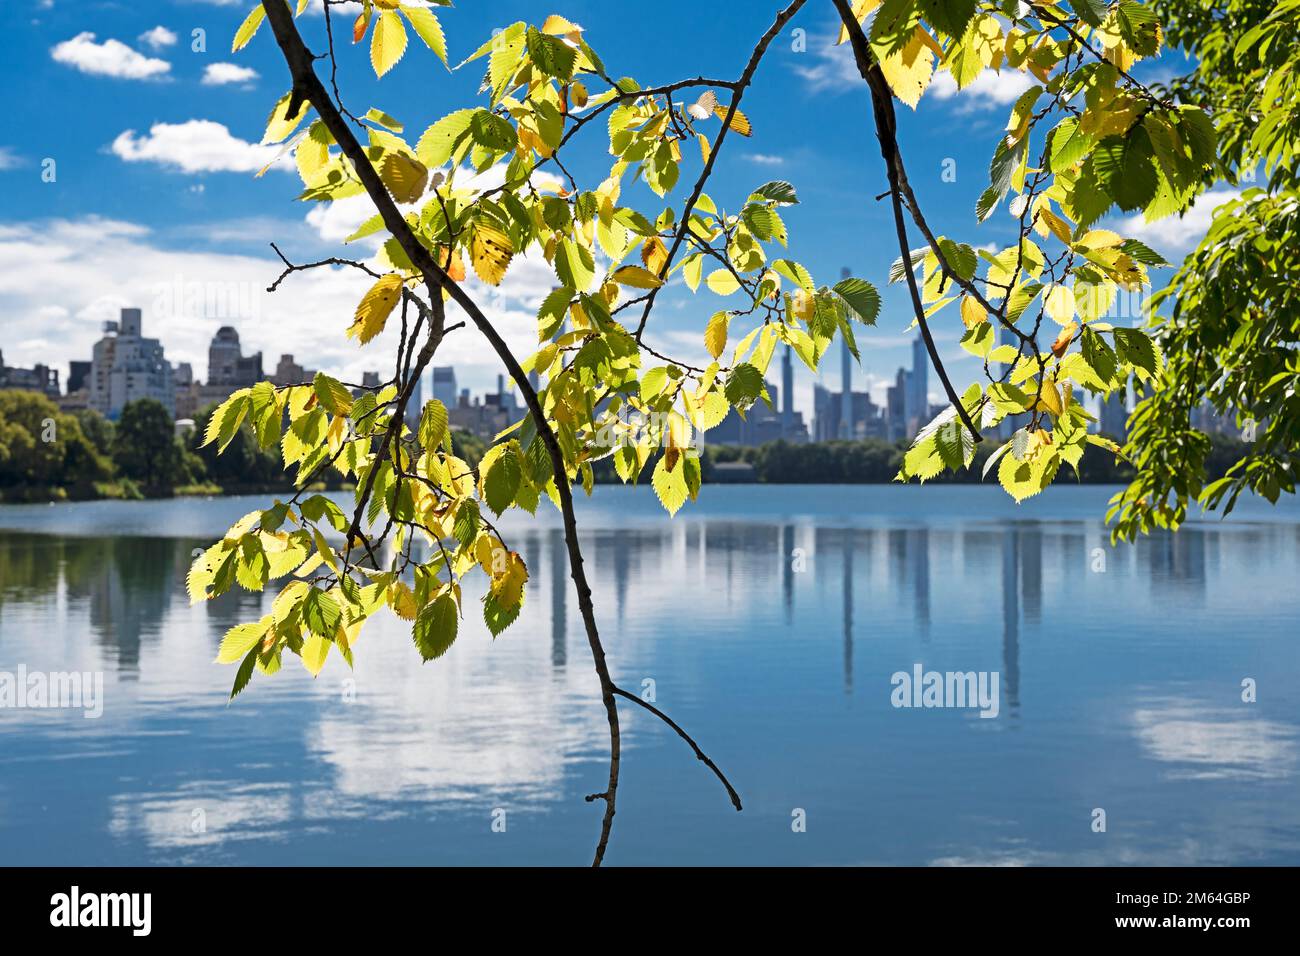 Midtown Manhattan skyline and Jacqueline Kennedy Onassis Reservoir, Central park NYC Stock Photo